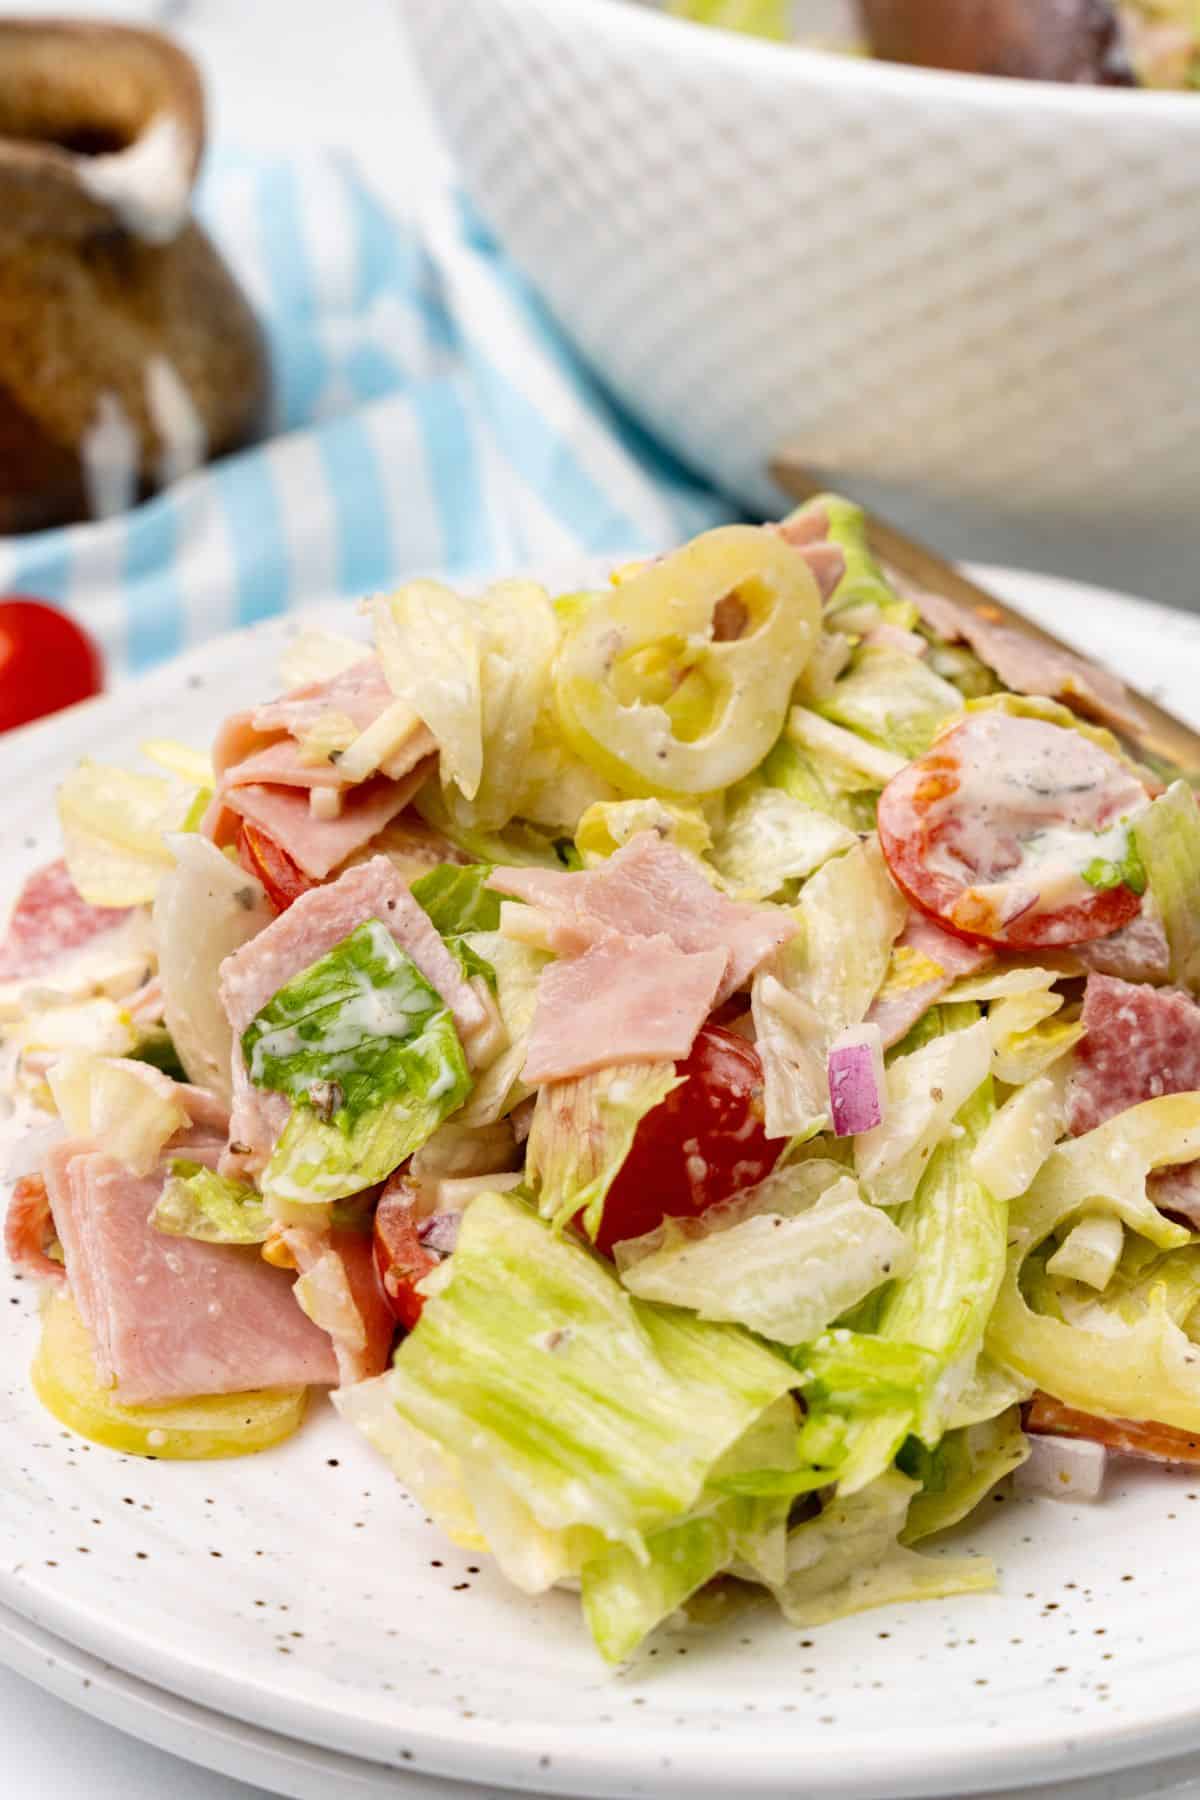 A grinder salad with ham, salami, and tomatoes.